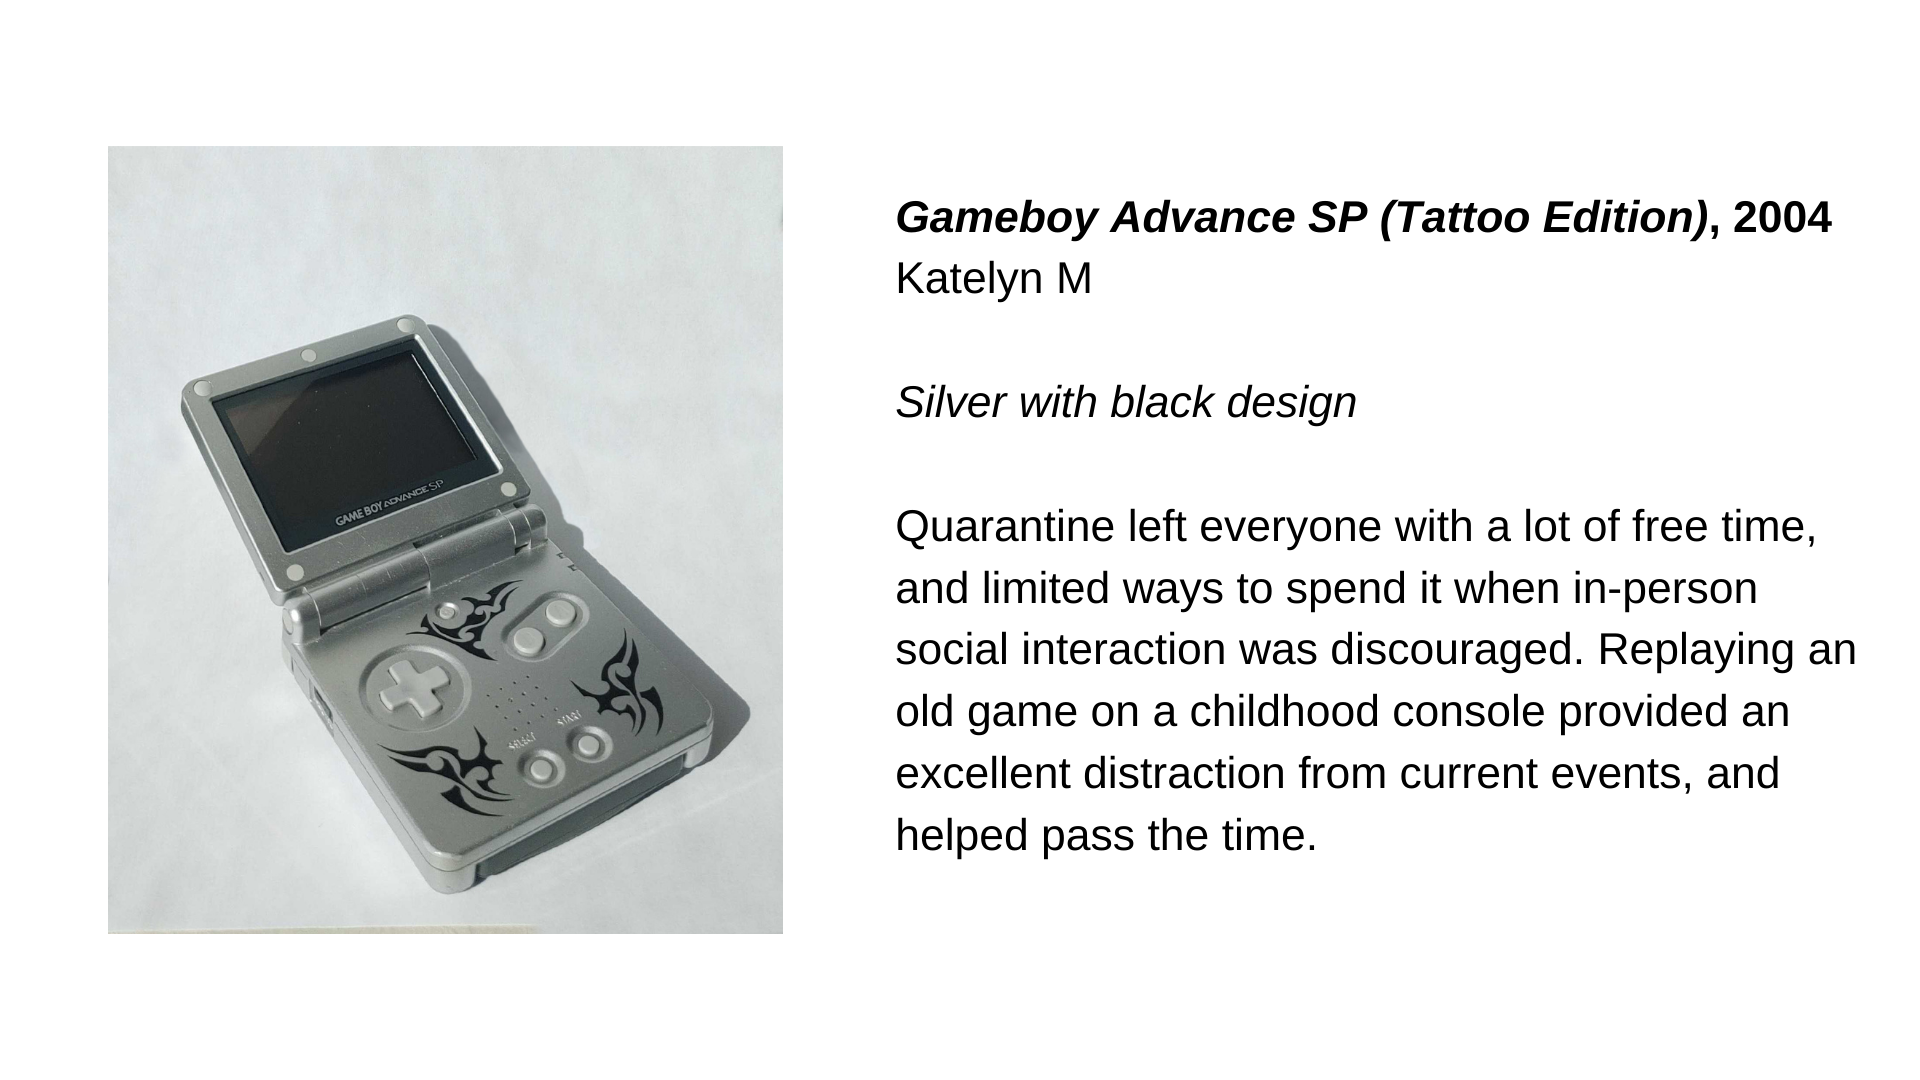  A silver Gameboy with black markings. Next to this, the text “Gameboy Advance SP (Tattoo Edition), 2004 - Katelyn M. Silver with black design. Quarantine left everyone with a lot of free time, and limited ways to spend it when in-person social inter